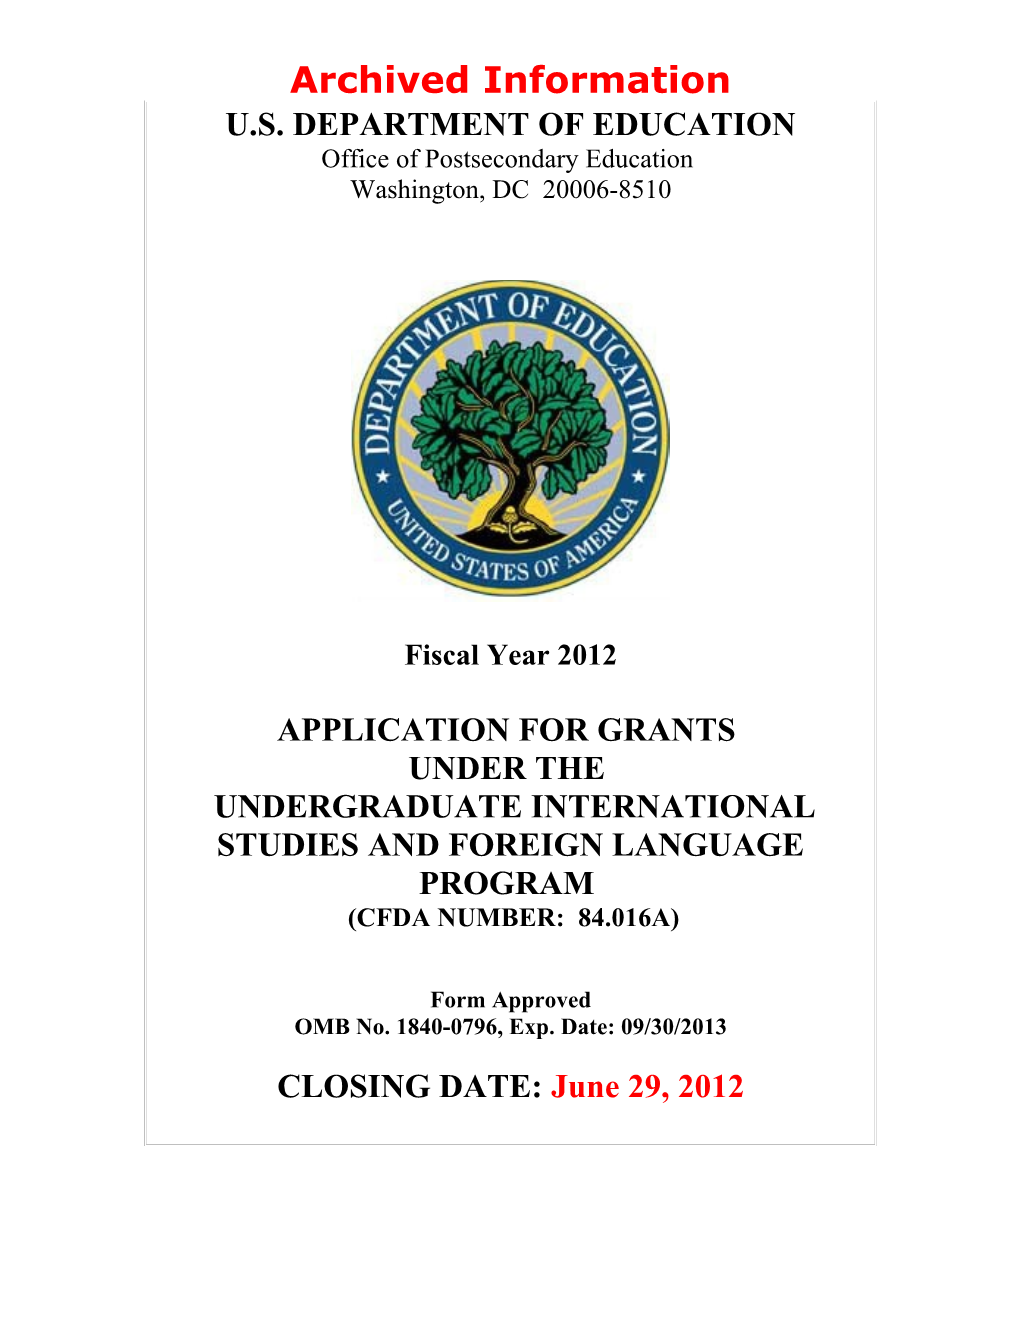 Archived: FY 2012 Grant Application for the Undergraduate International Studies and Foreign